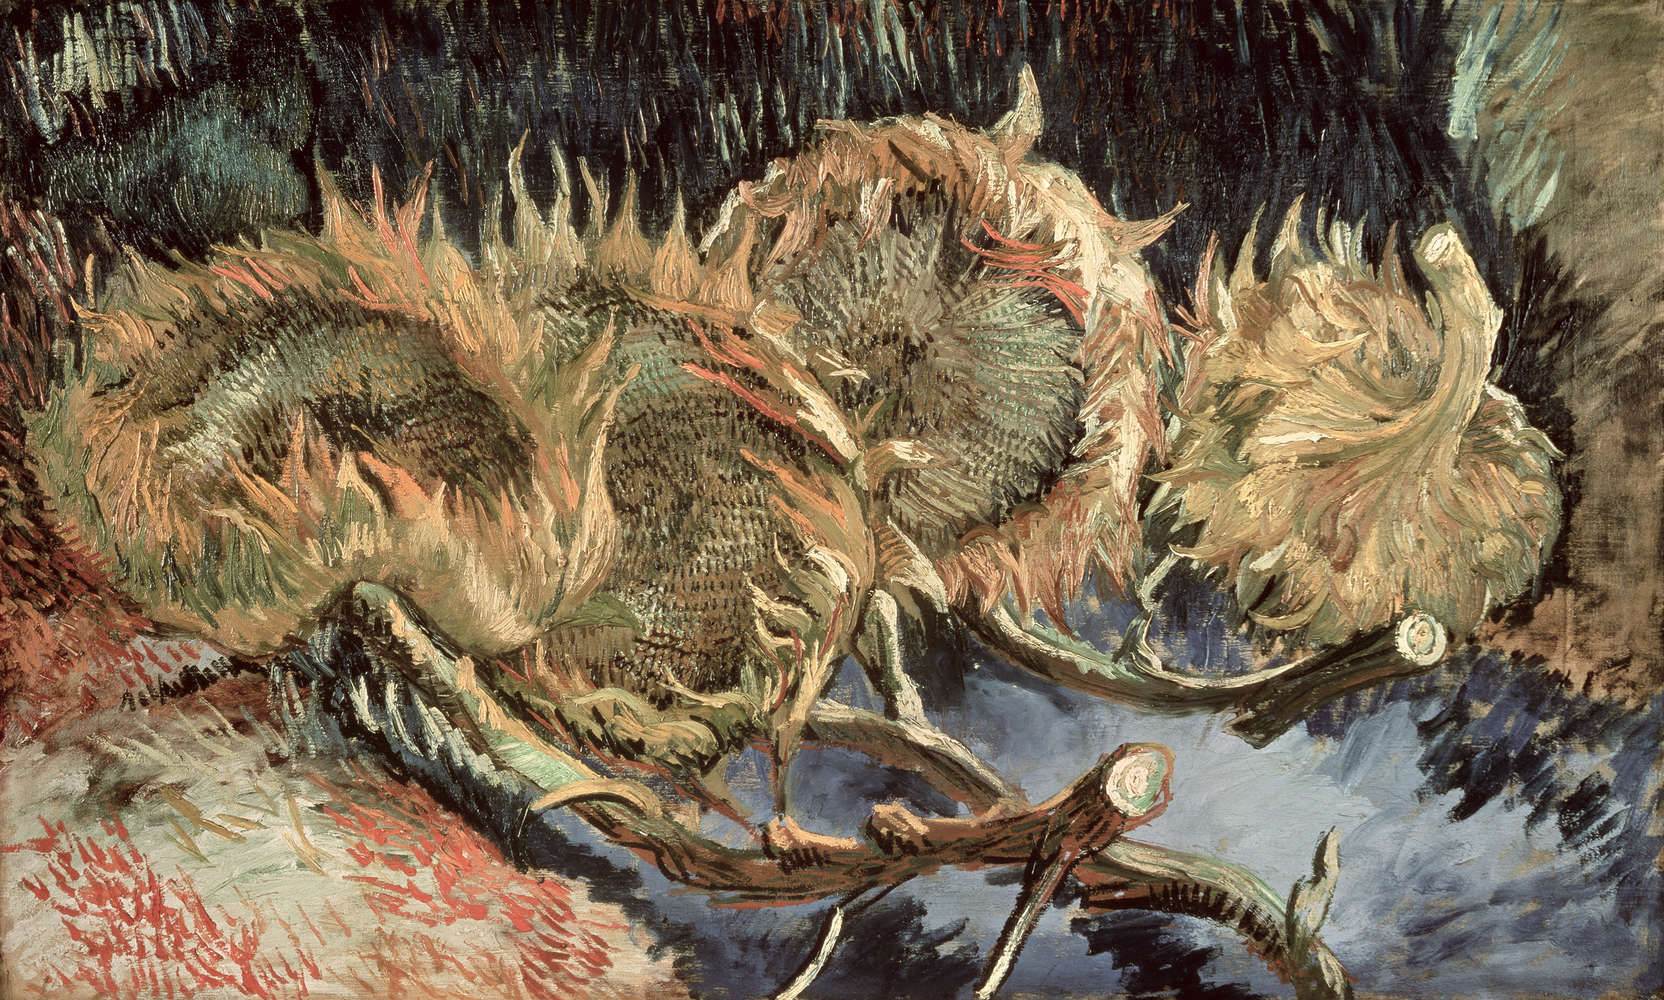             Photo wallpaper "Four withered sunflowers" by Vincent van Gogh
        